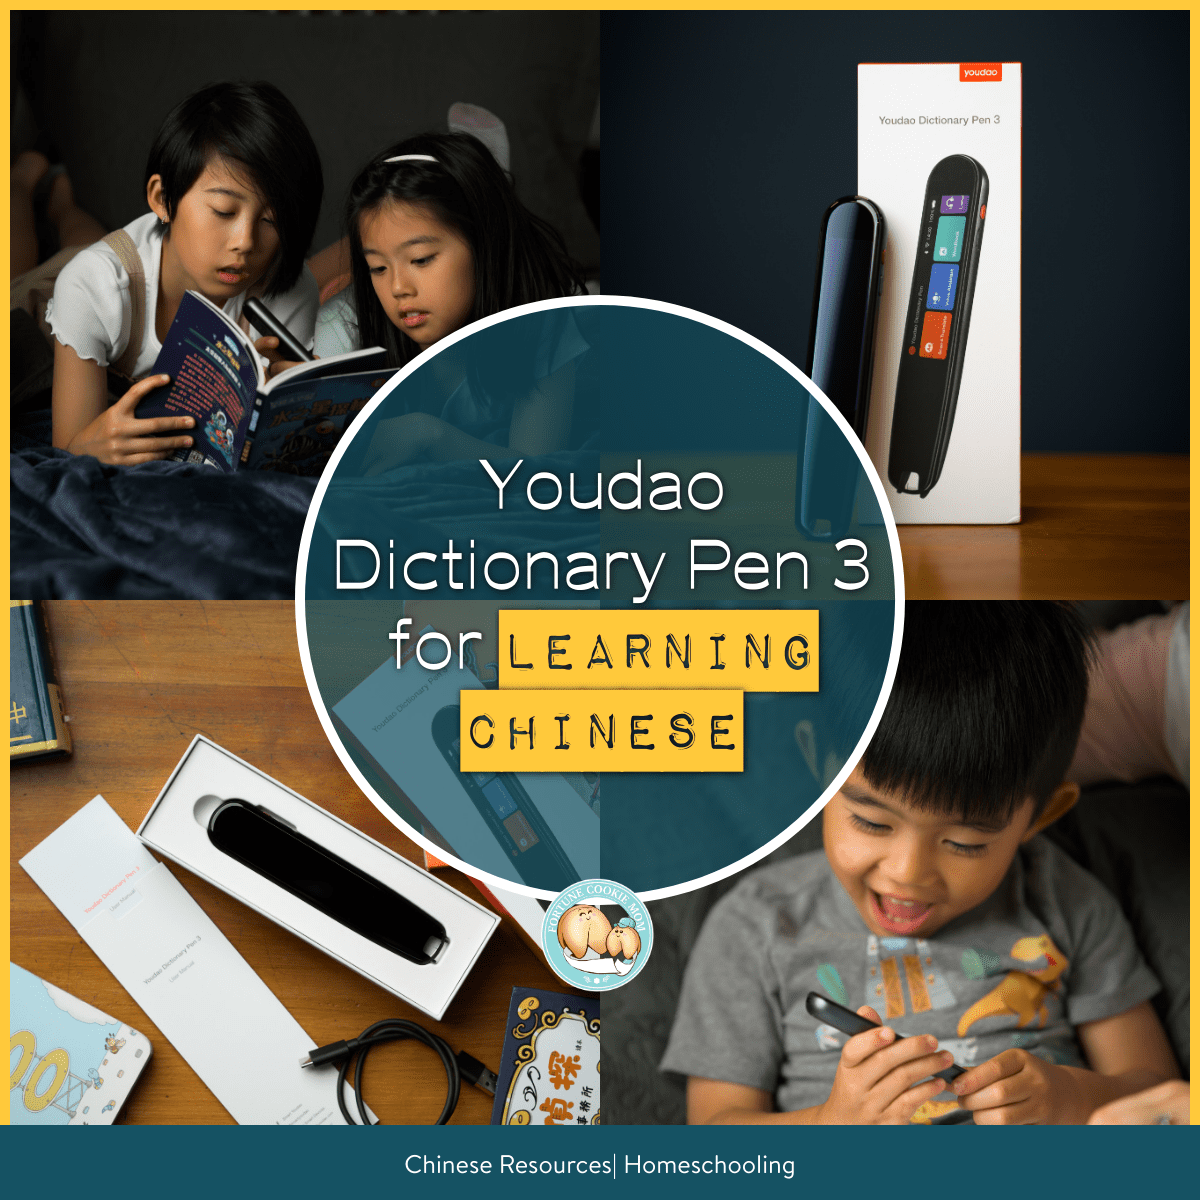 Youdao Dictionary Pen 3 for Learning Chinese